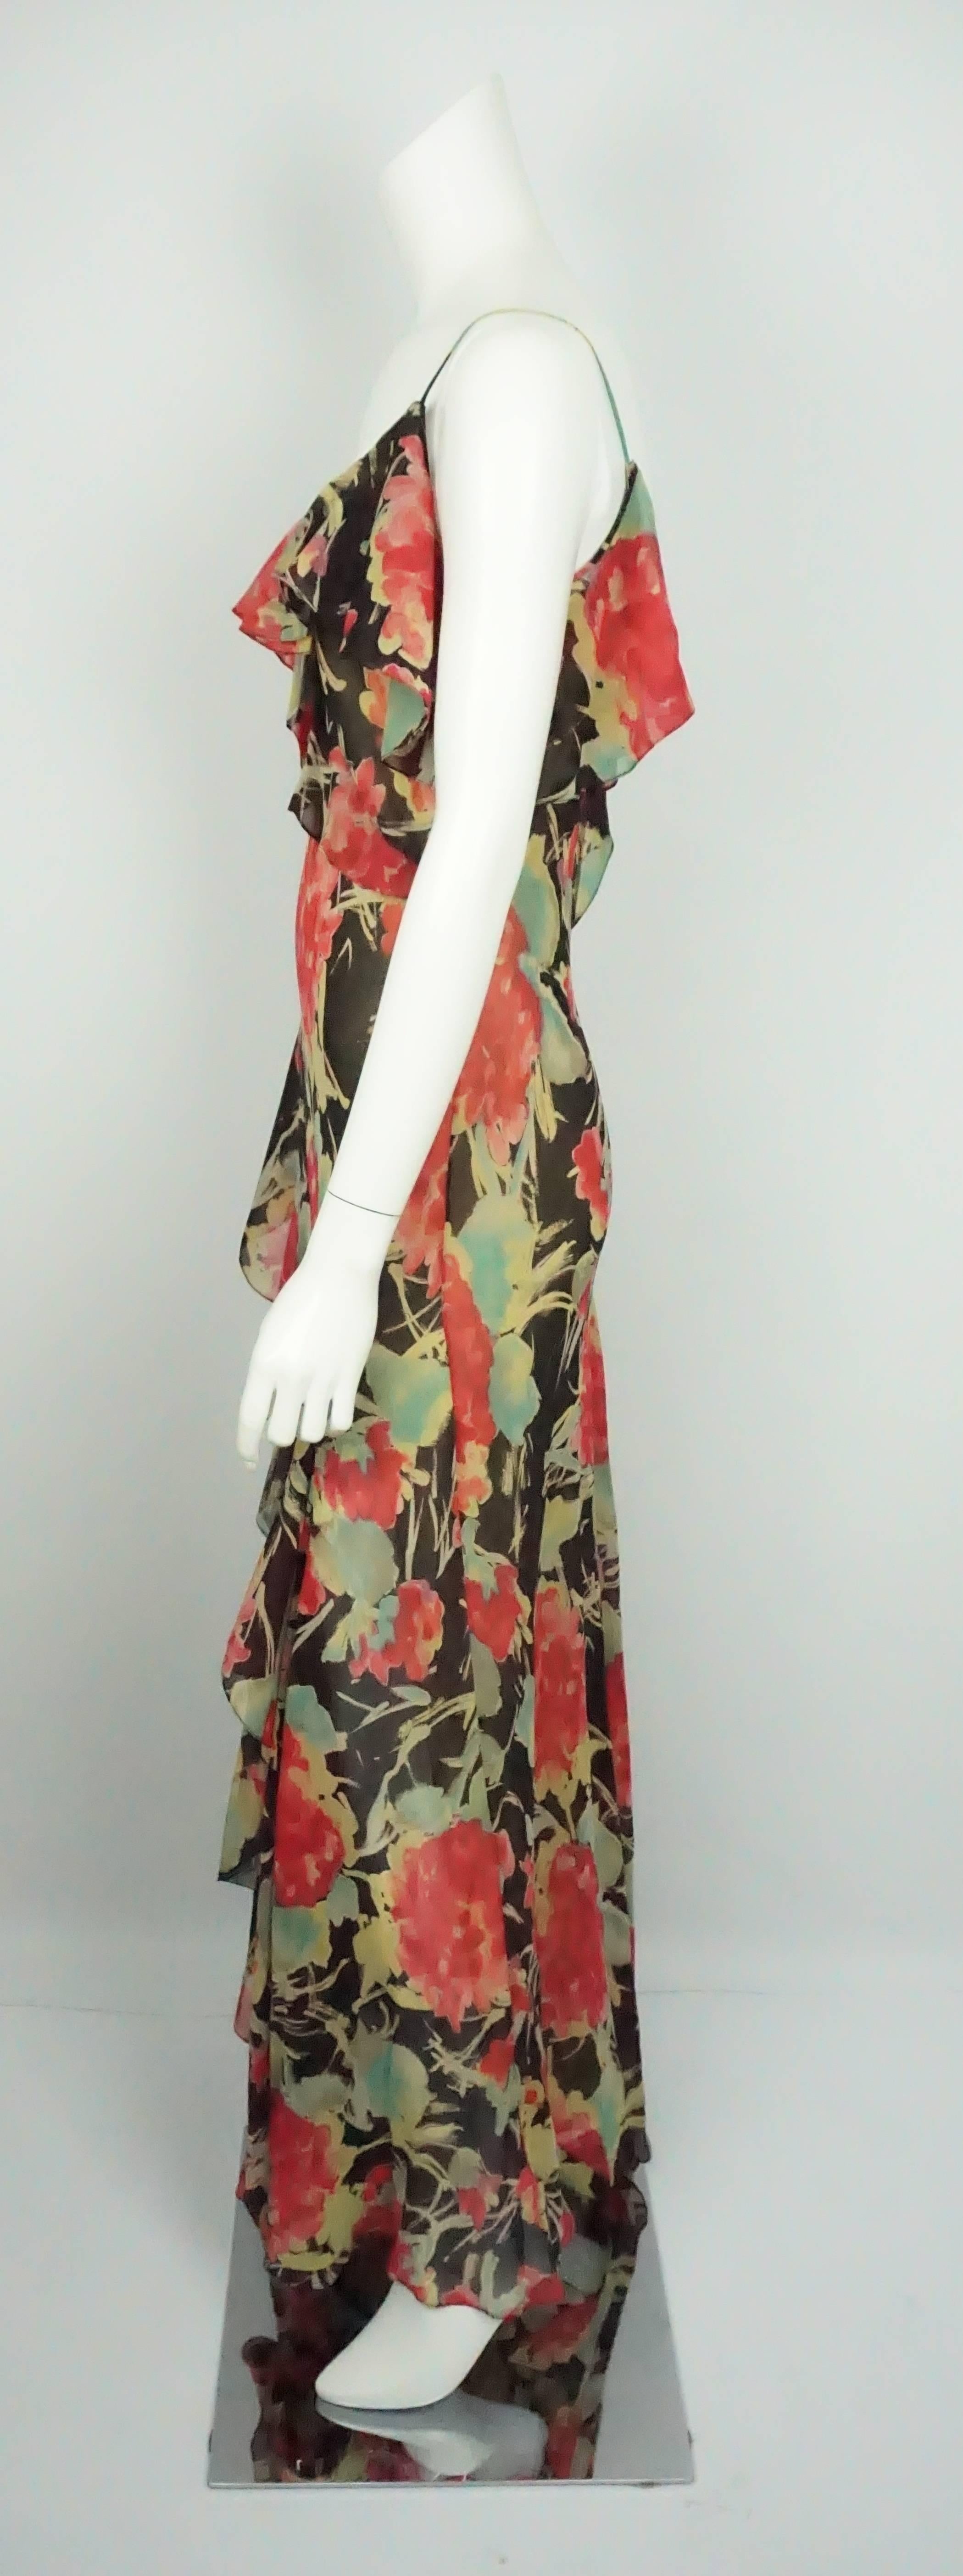 RL Purple Label Multi Print Silk Long Dress w/ Ruffles - 8 - NWT This beautiful summer dress is new with tags. The dress is completely made of silk. The dress has spaghetti straps and side sleeves that are the same fabric as the dress. The top of